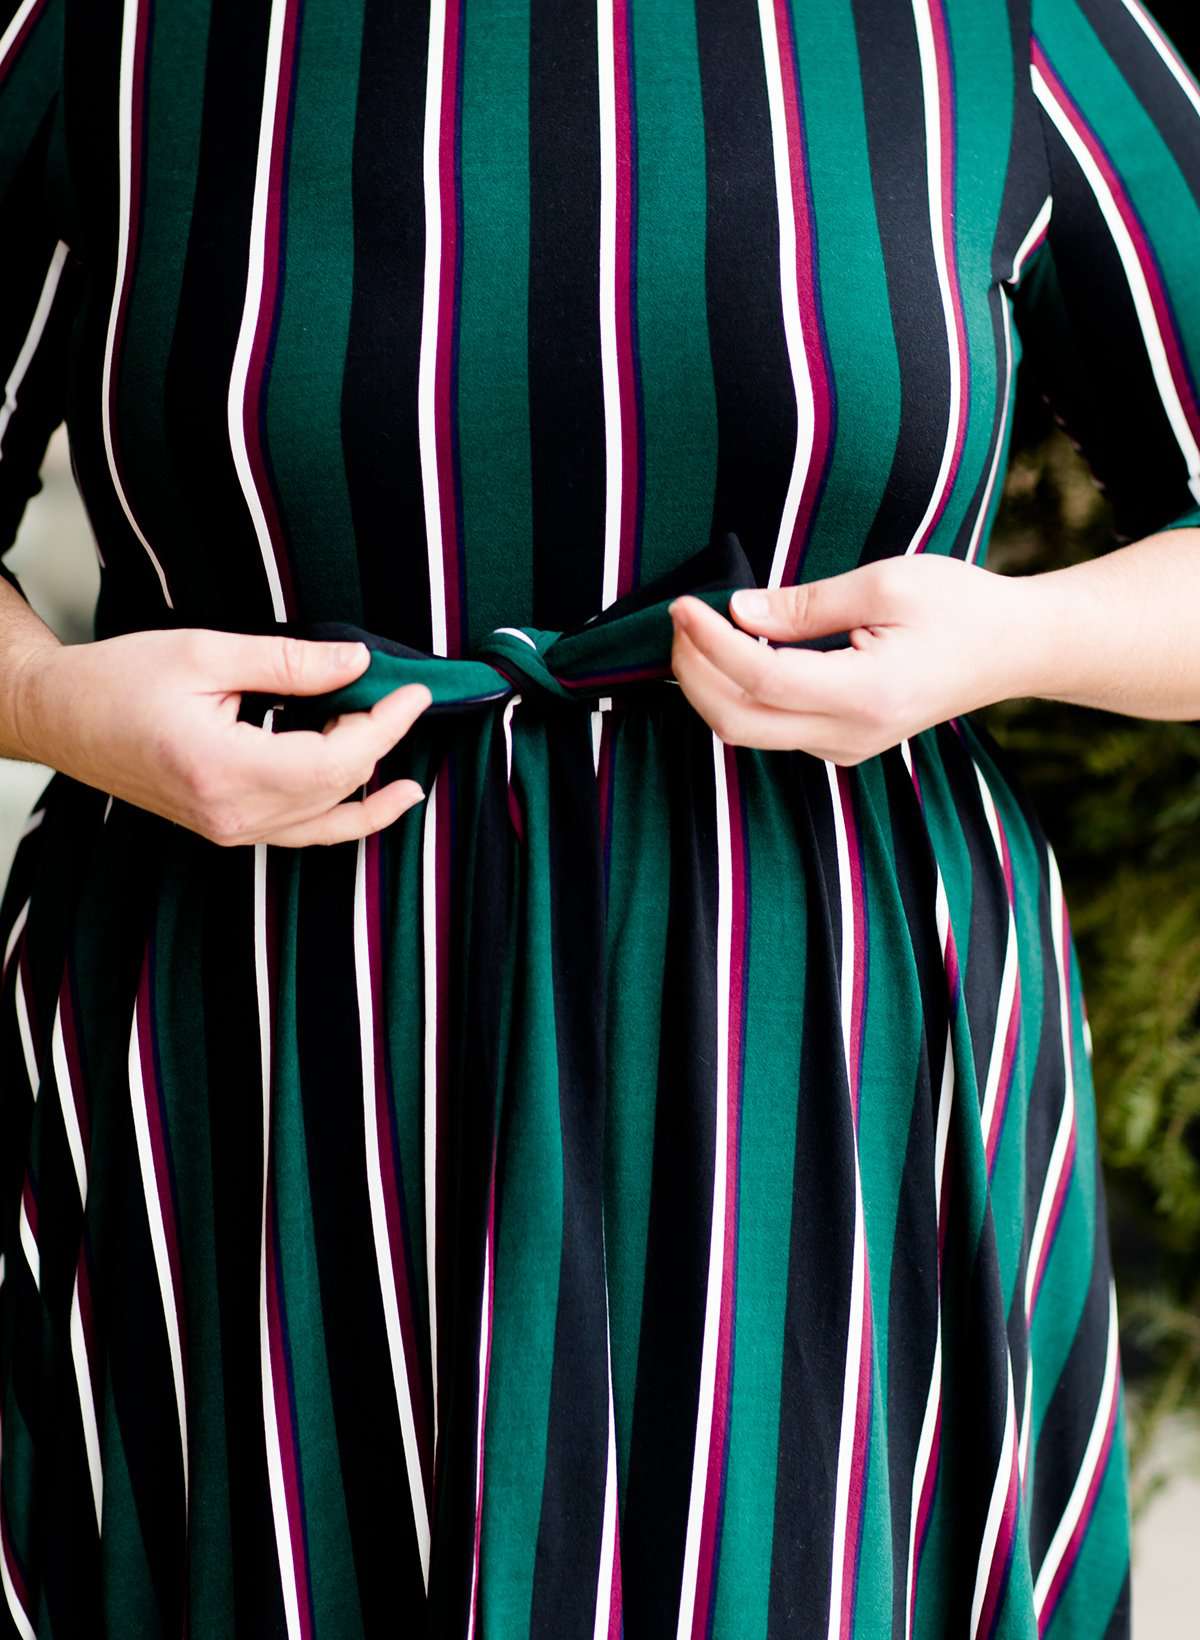 Modest woman wearing a green and black striped midi dress with a self tie bow. She is wearing black leggings and black booties as well. She is at Inherit Clothing Company.